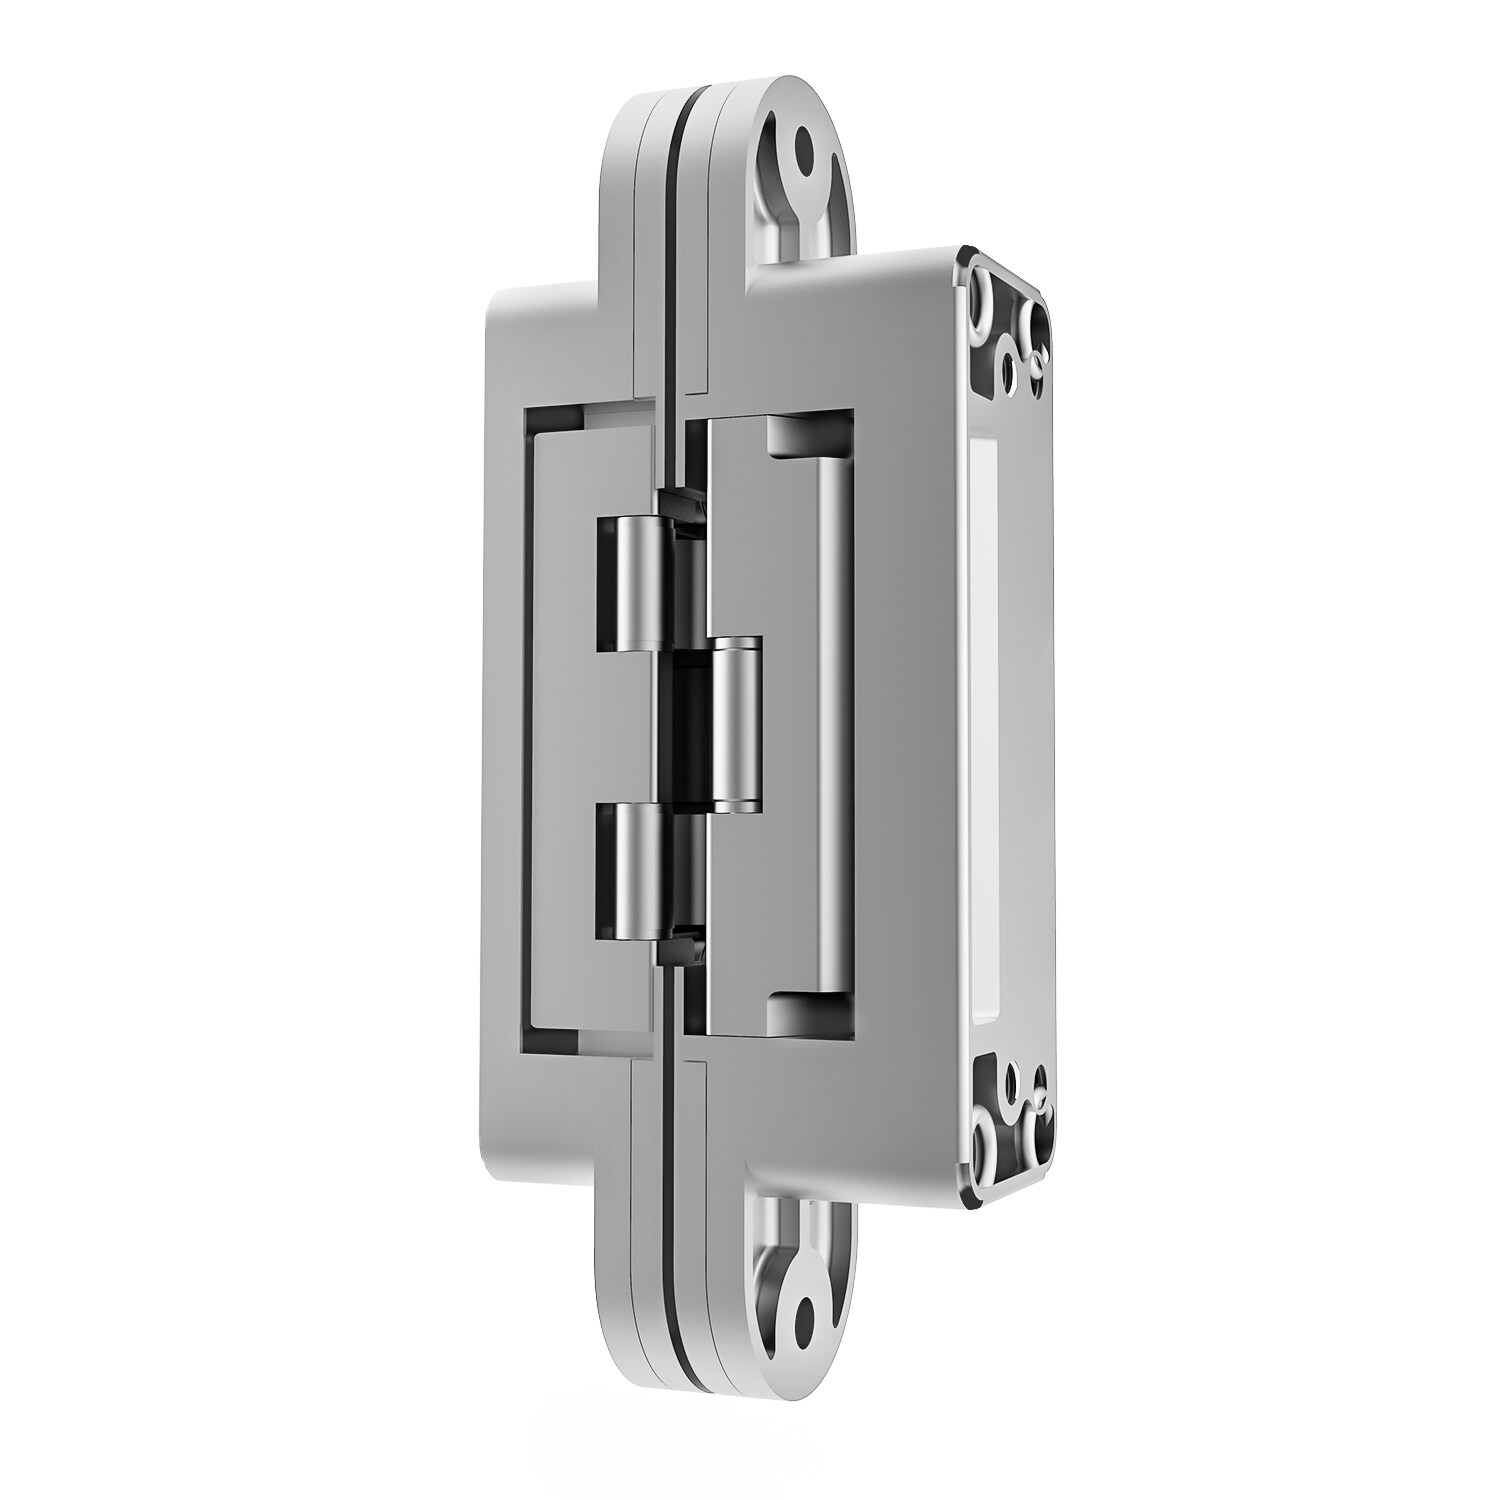 3D Concealed Invisible 3 Way Adjustable Heavy-Duty Hinge by Villar Home  Designs - Bed Bath & Beyond - 38284634